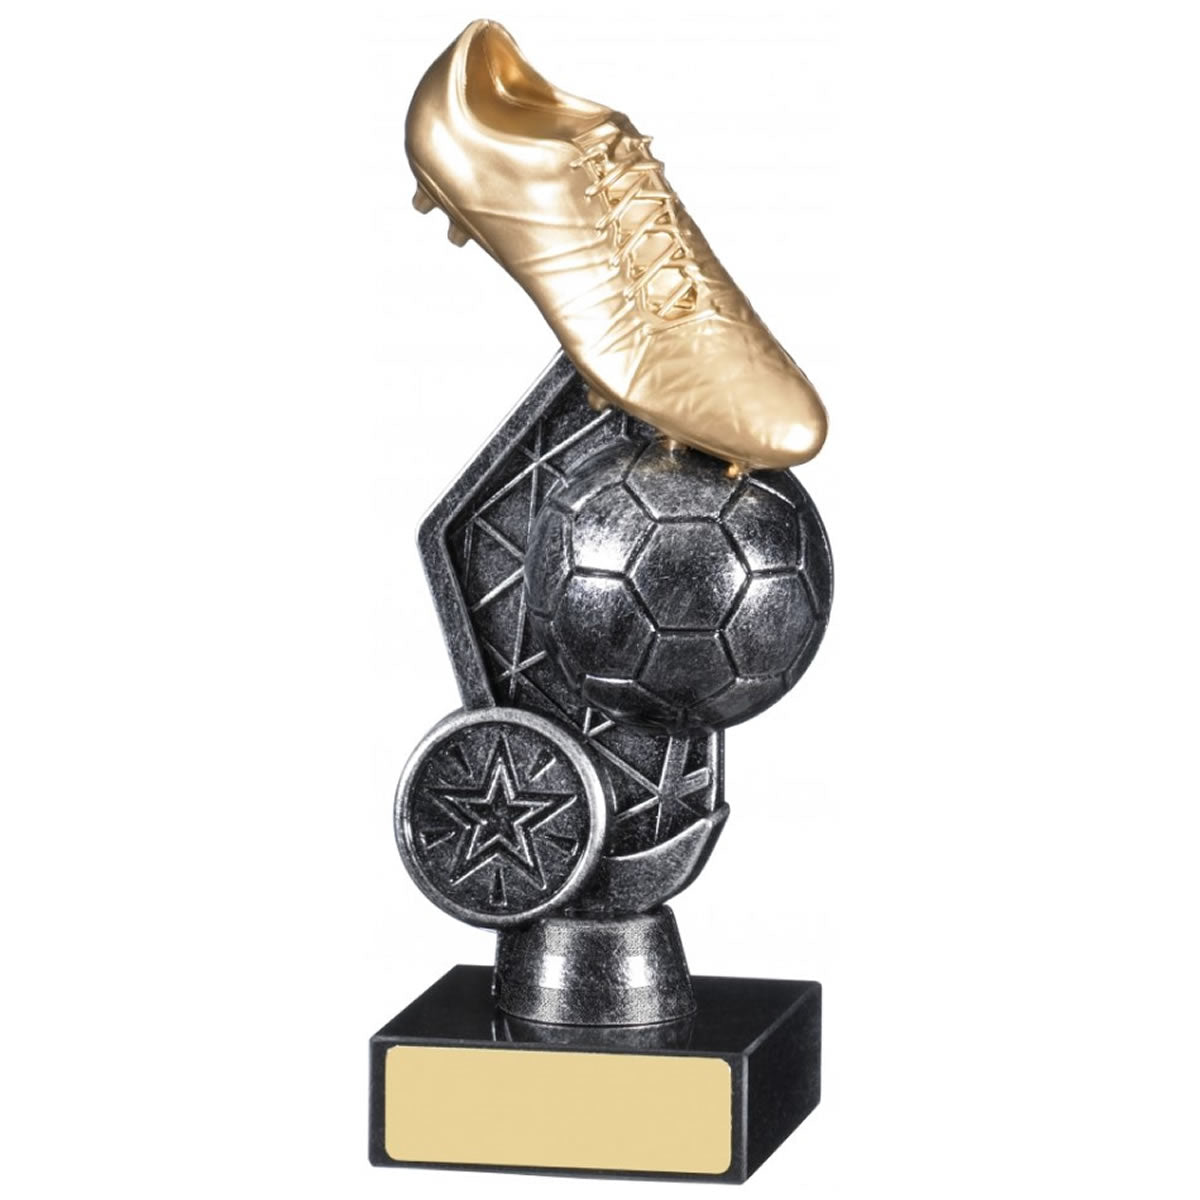 Football Gold Boot Trophy Team Awards in Black and Gold - Pack of 15Football Gold Boot Trophy Team Awards in Black and Gold - Pack of 16